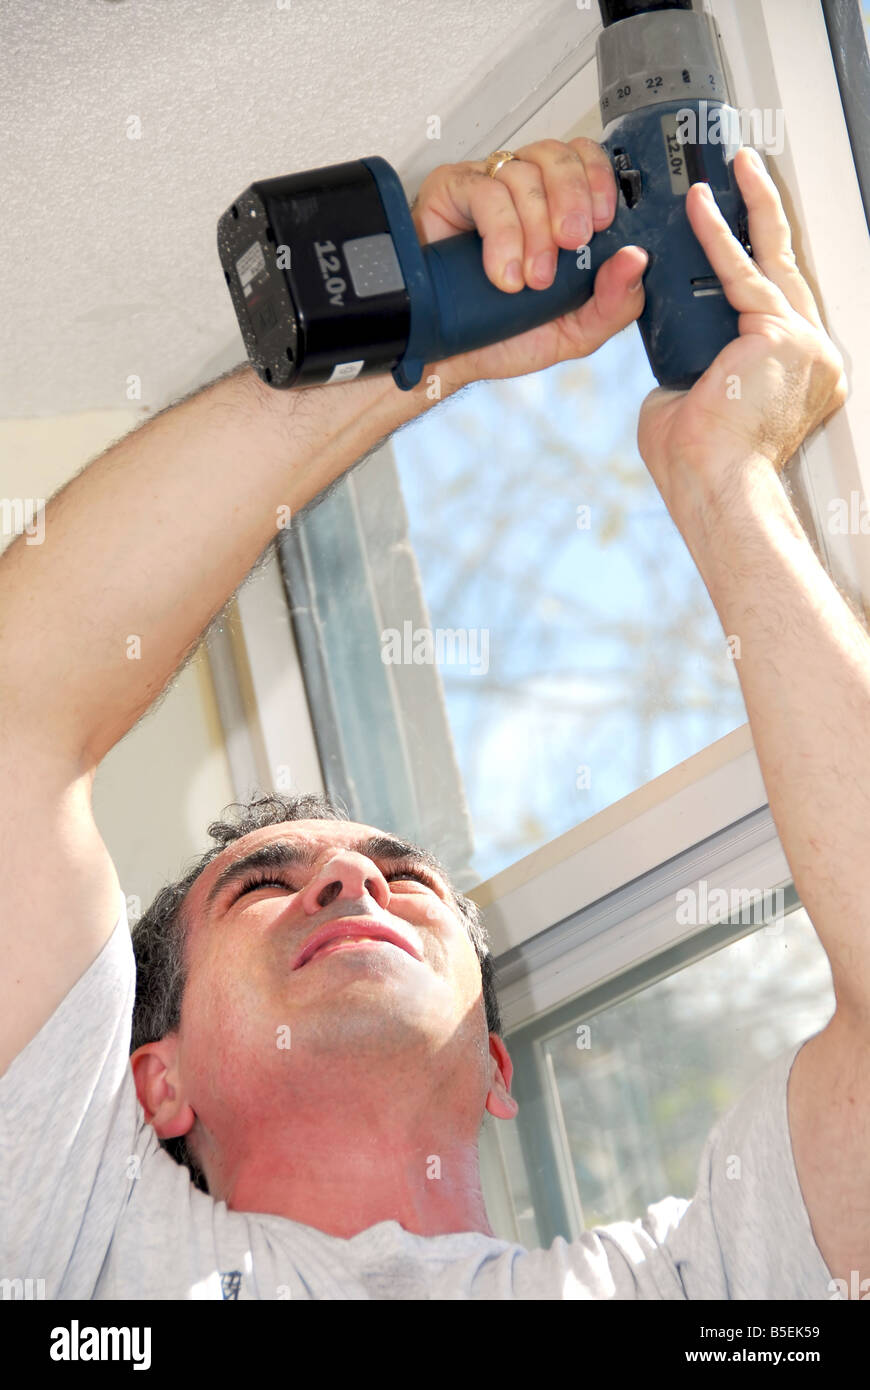 Man drilling a hole in a ceiling Stock Photo